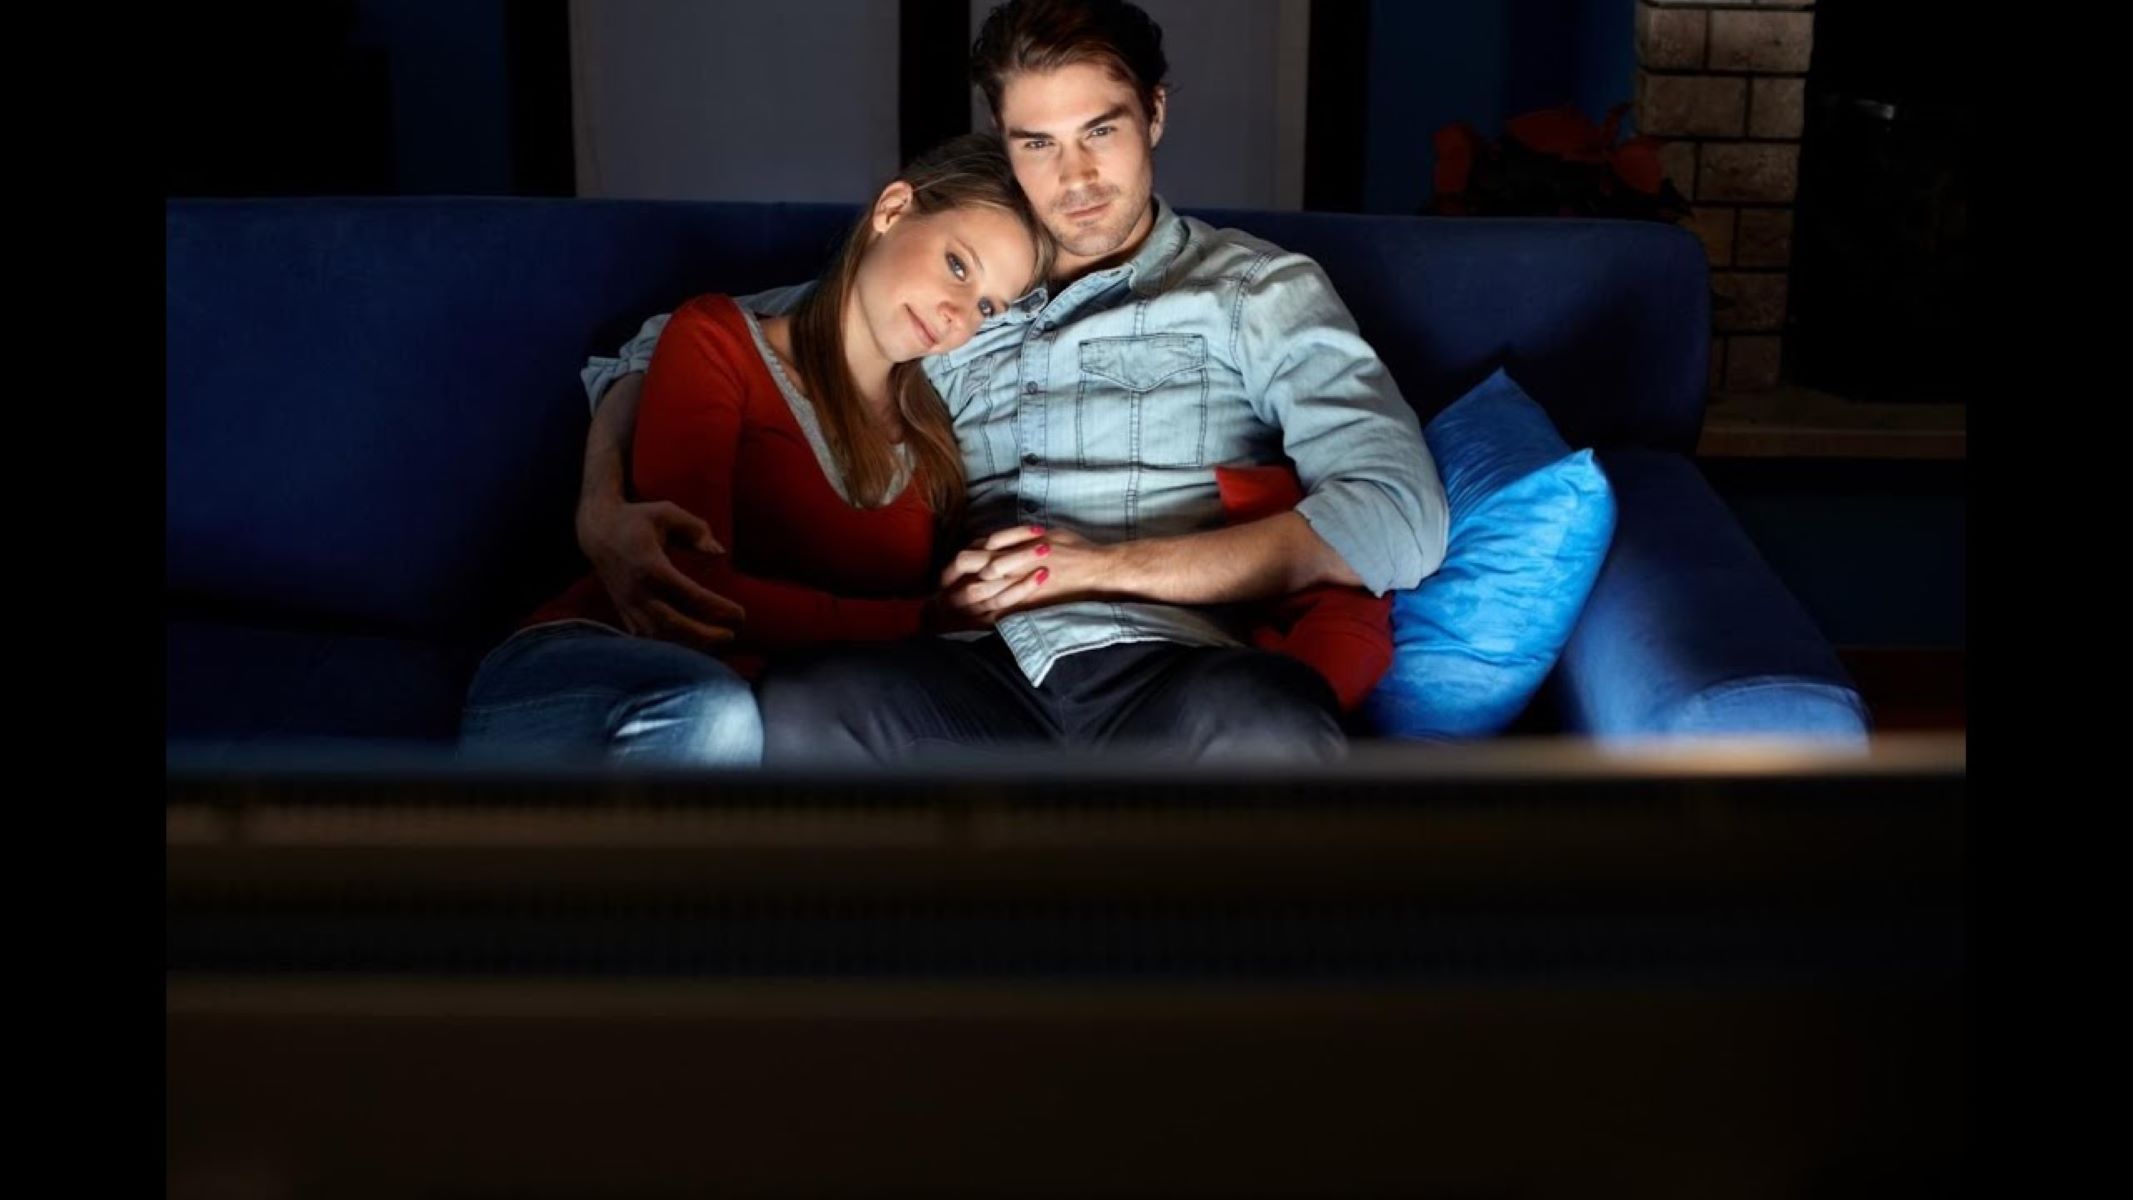 How To Watch A Movie Together